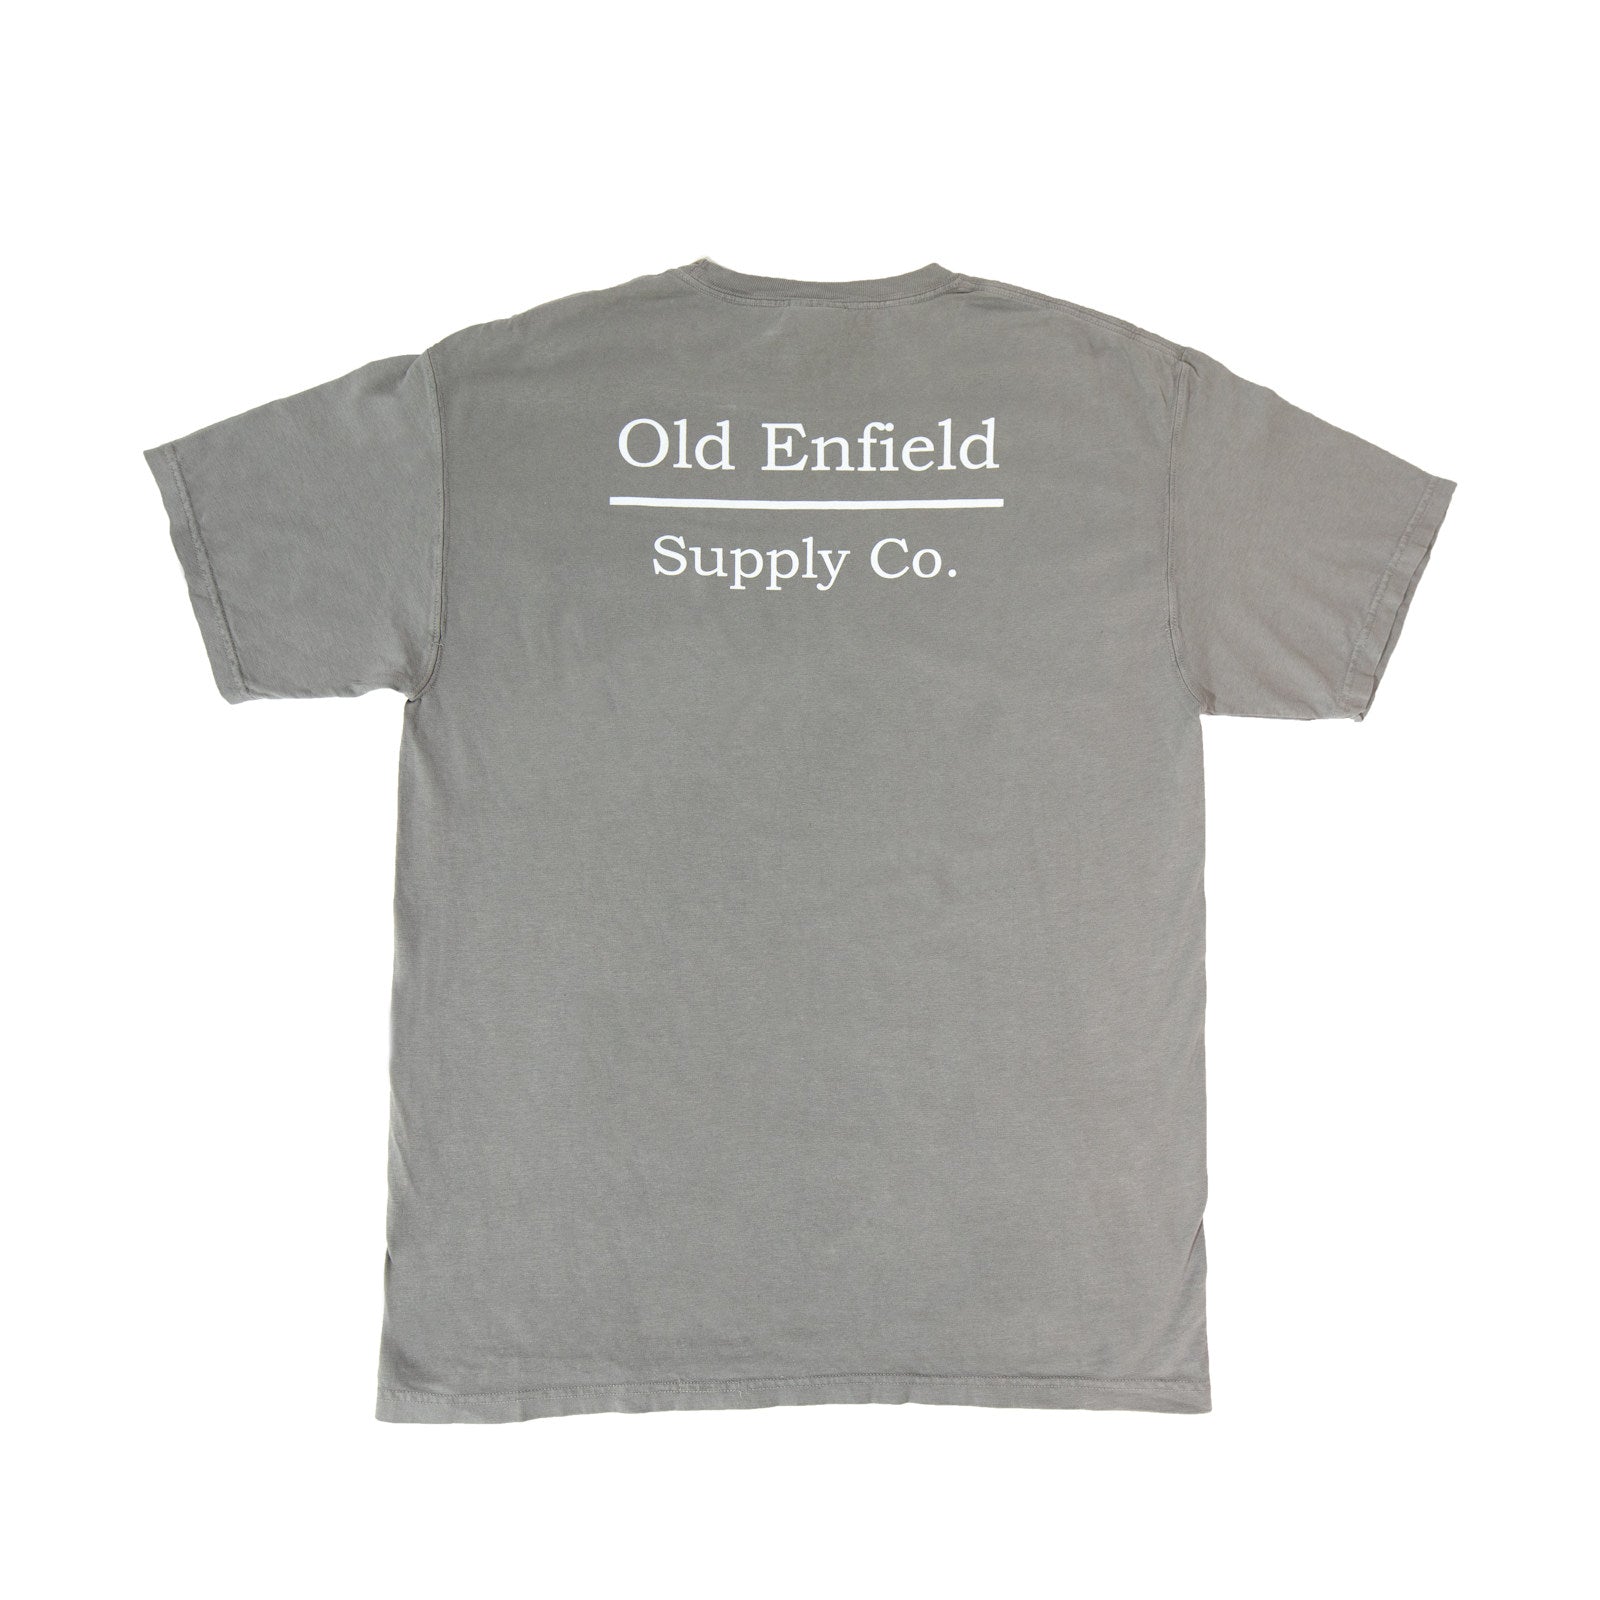 tee shirt, cotton, old enfield, t-shirt, hunting, fishing, old enfield supply co.